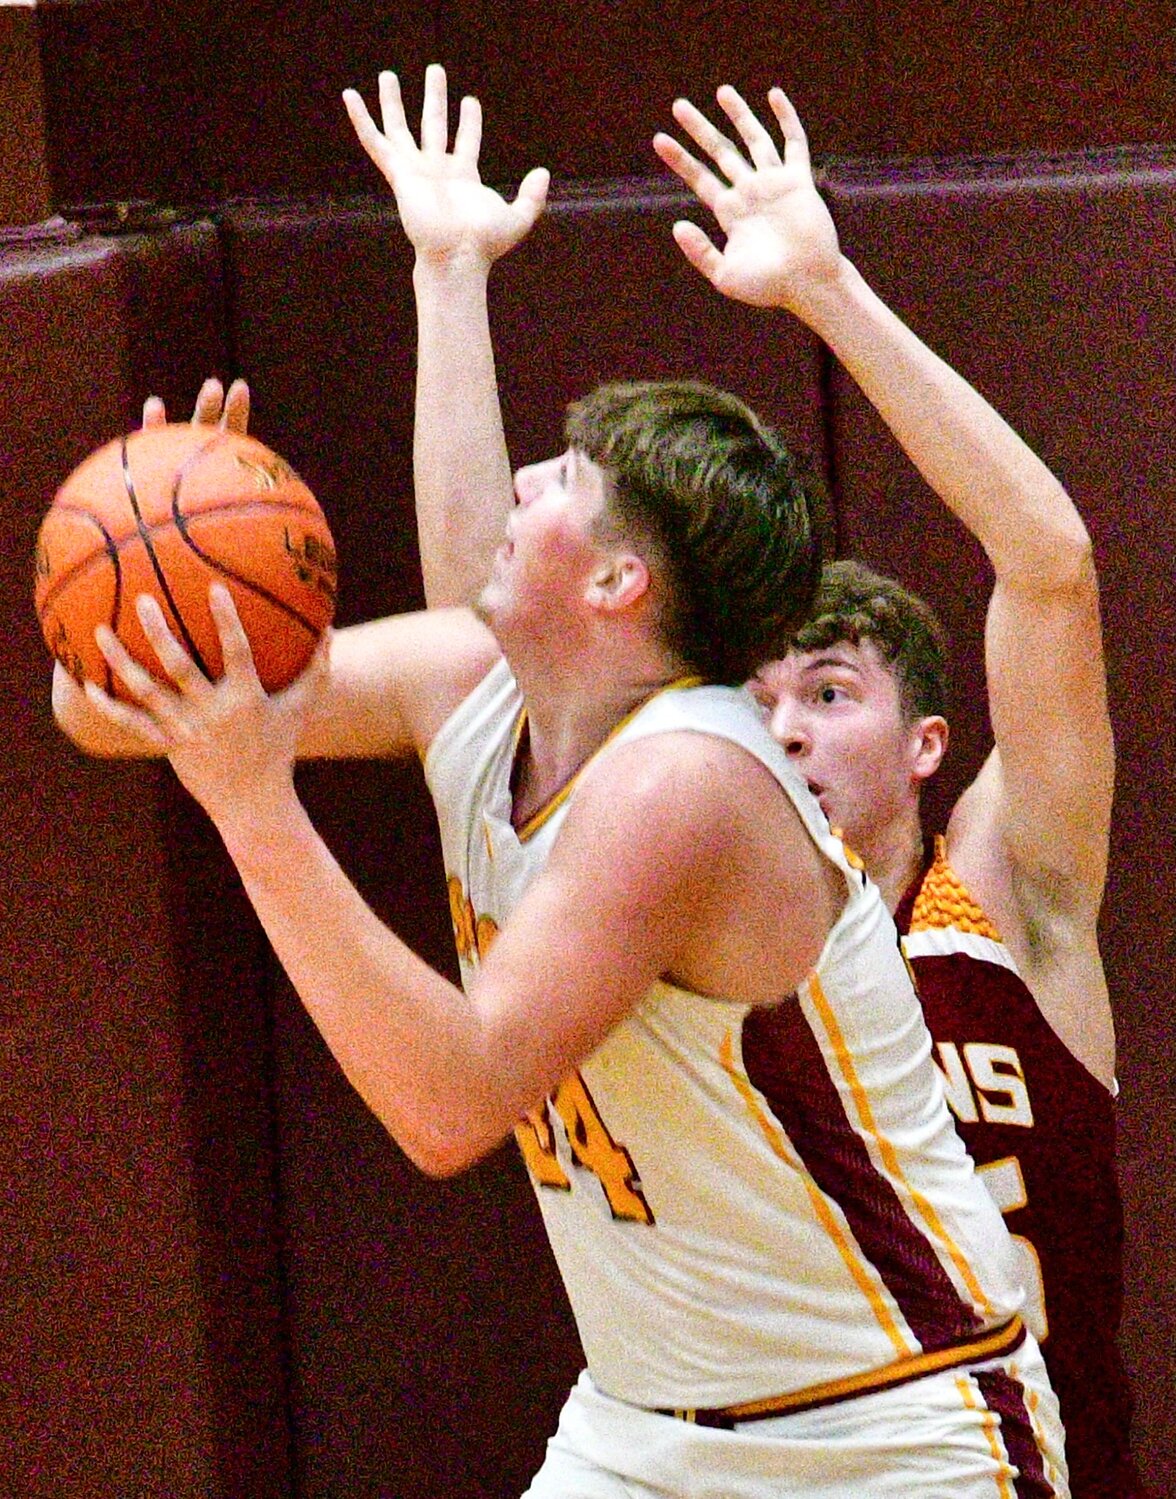 SPOKANE'S RIDGE KIPPER posts up in the paint against Mansfield on Tuesday.